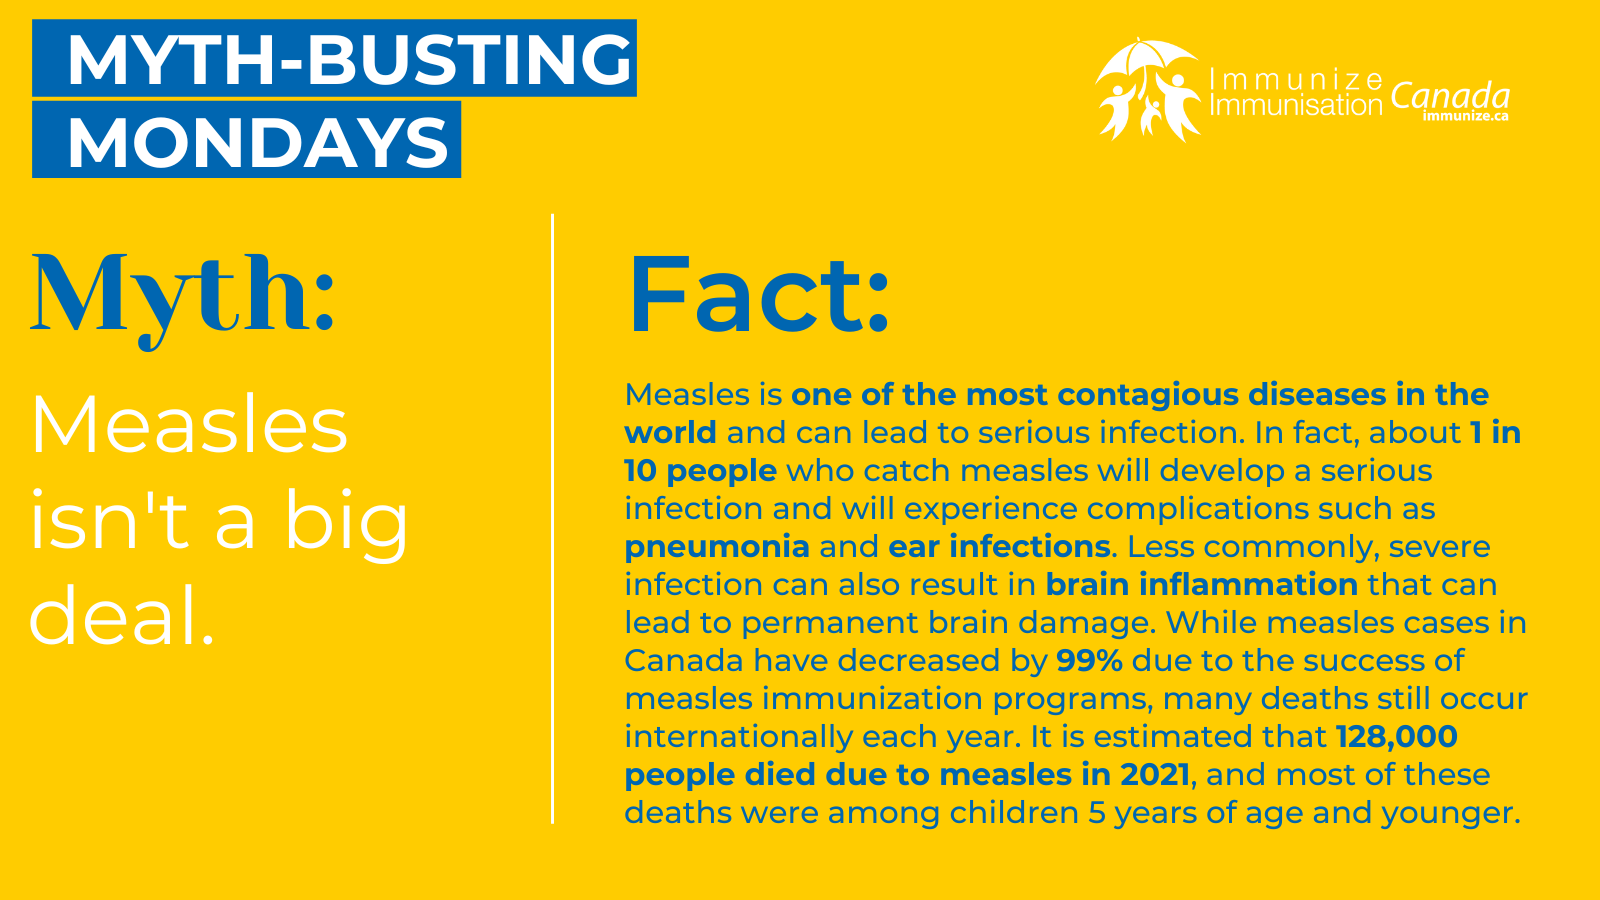 Myth-busting Mondays - measles - image 1 for Twitter